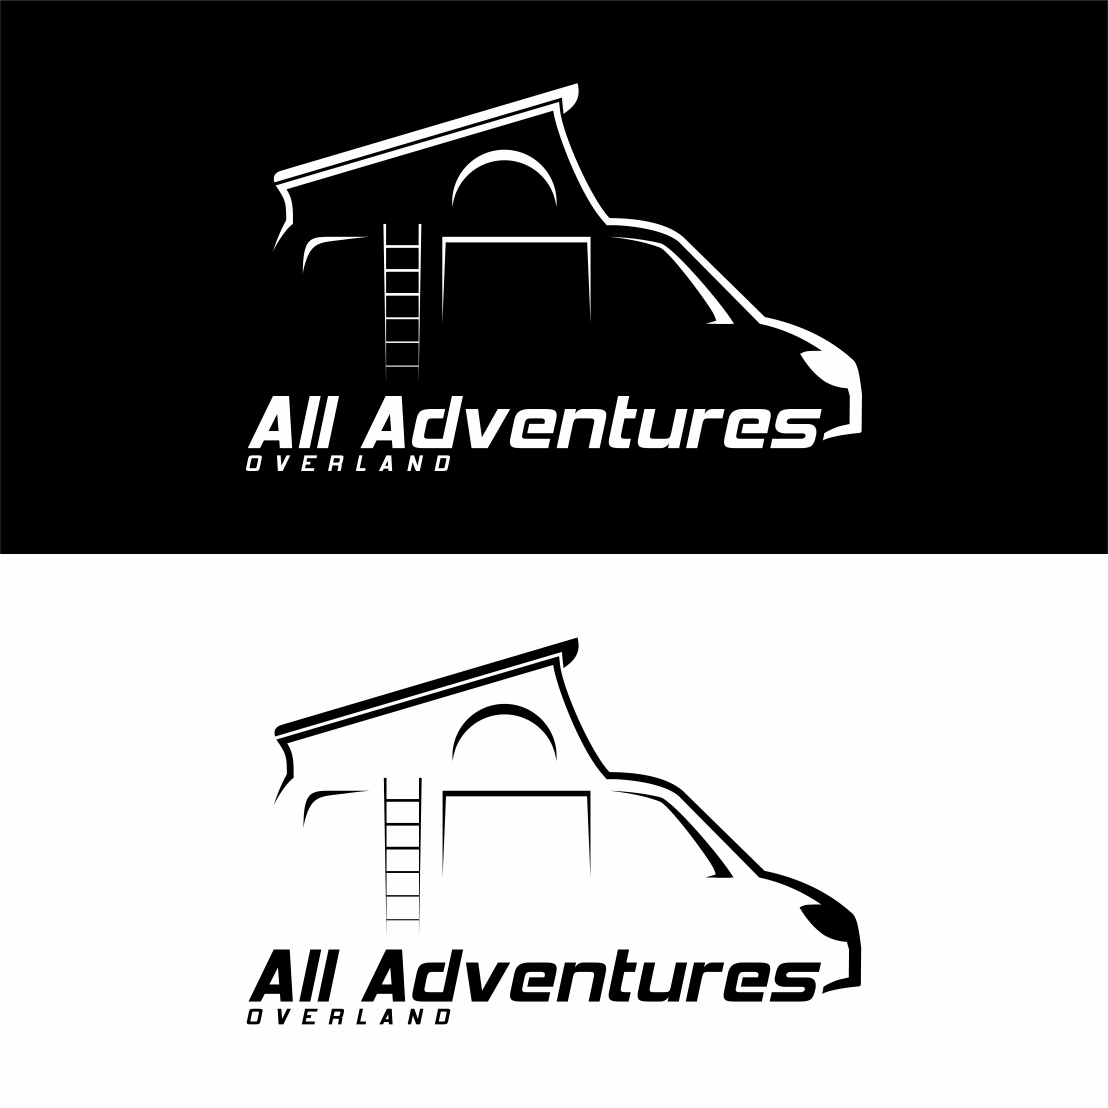 Camper van or recreational vehicle (RV) adventure car logo template, travel and recreation vector design - only 7$ preview image.